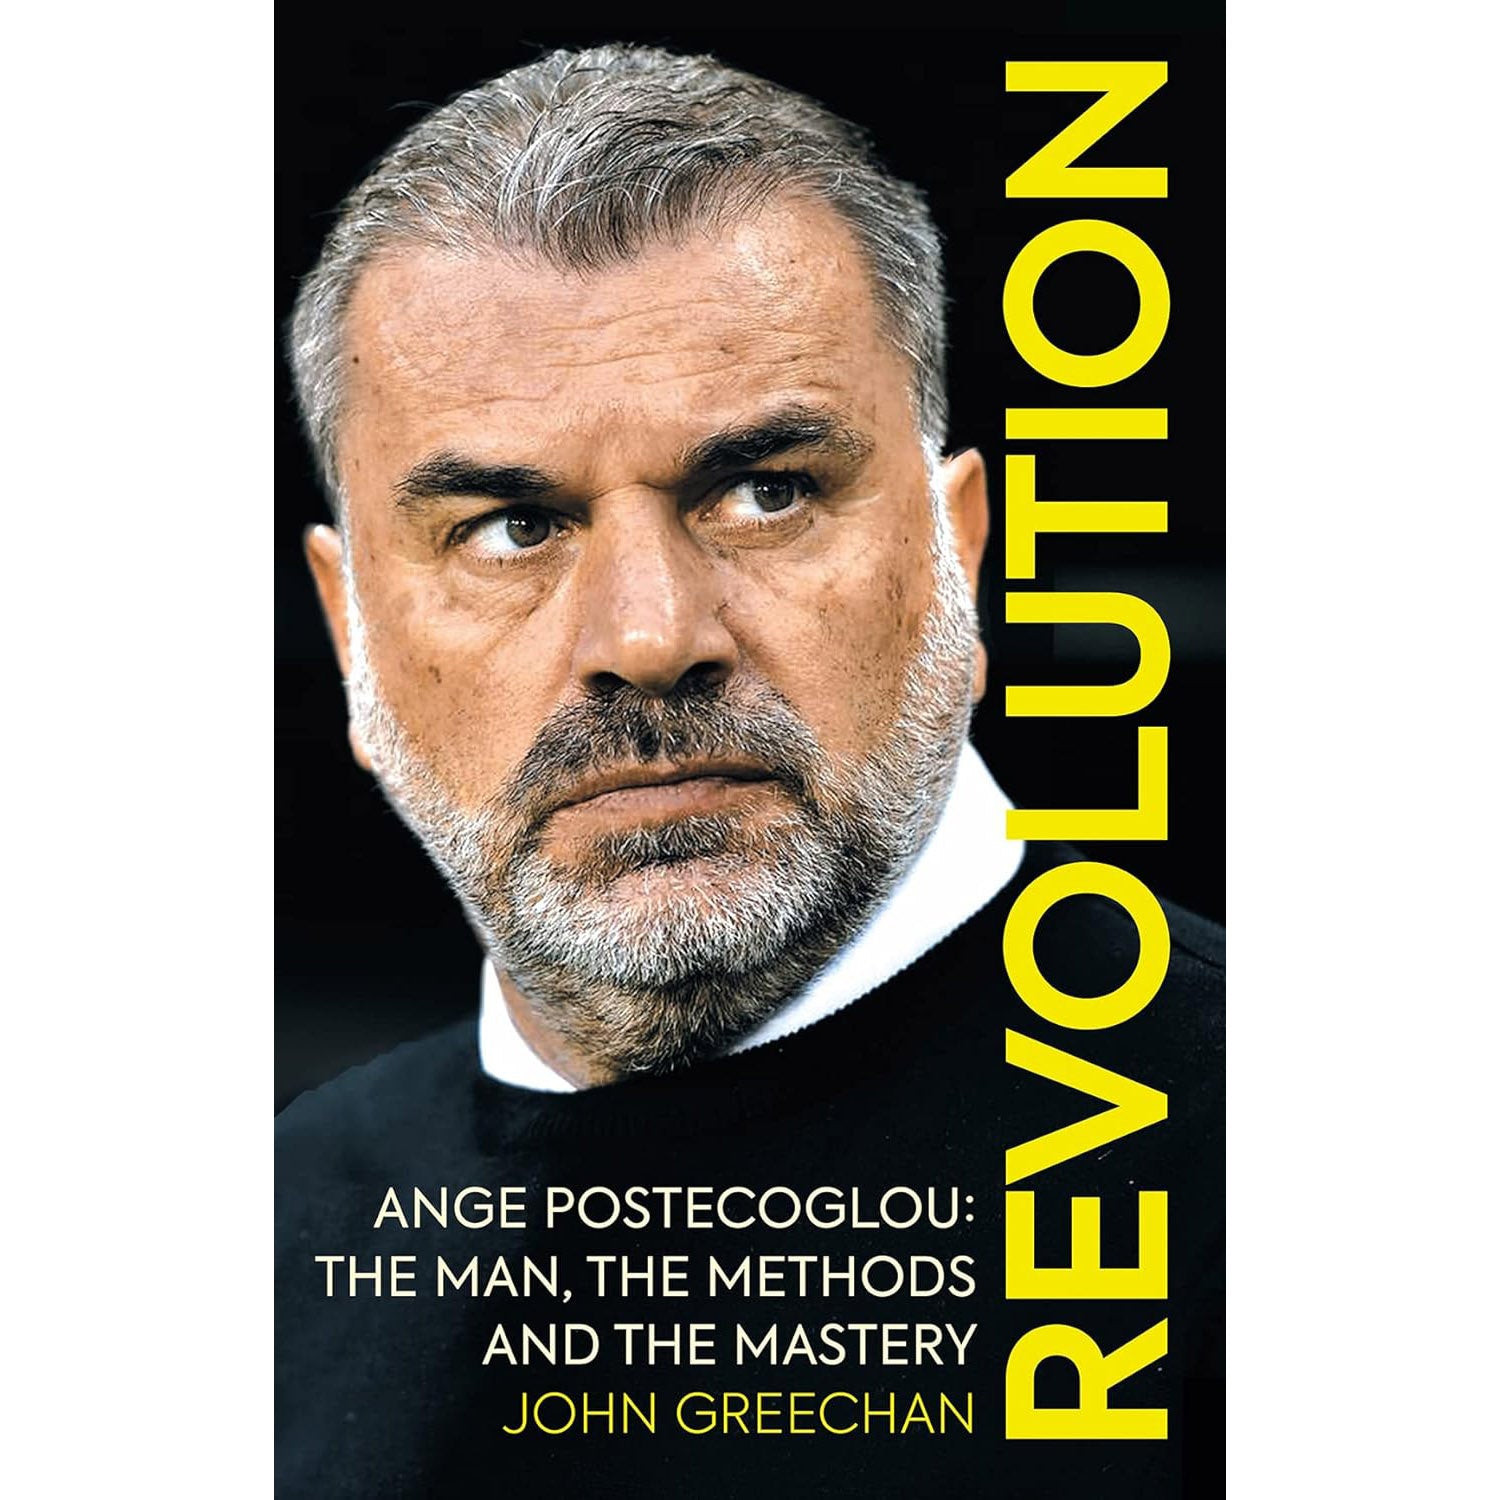 Revolution – Ange Postecoglou – The man, the methods and the mastery